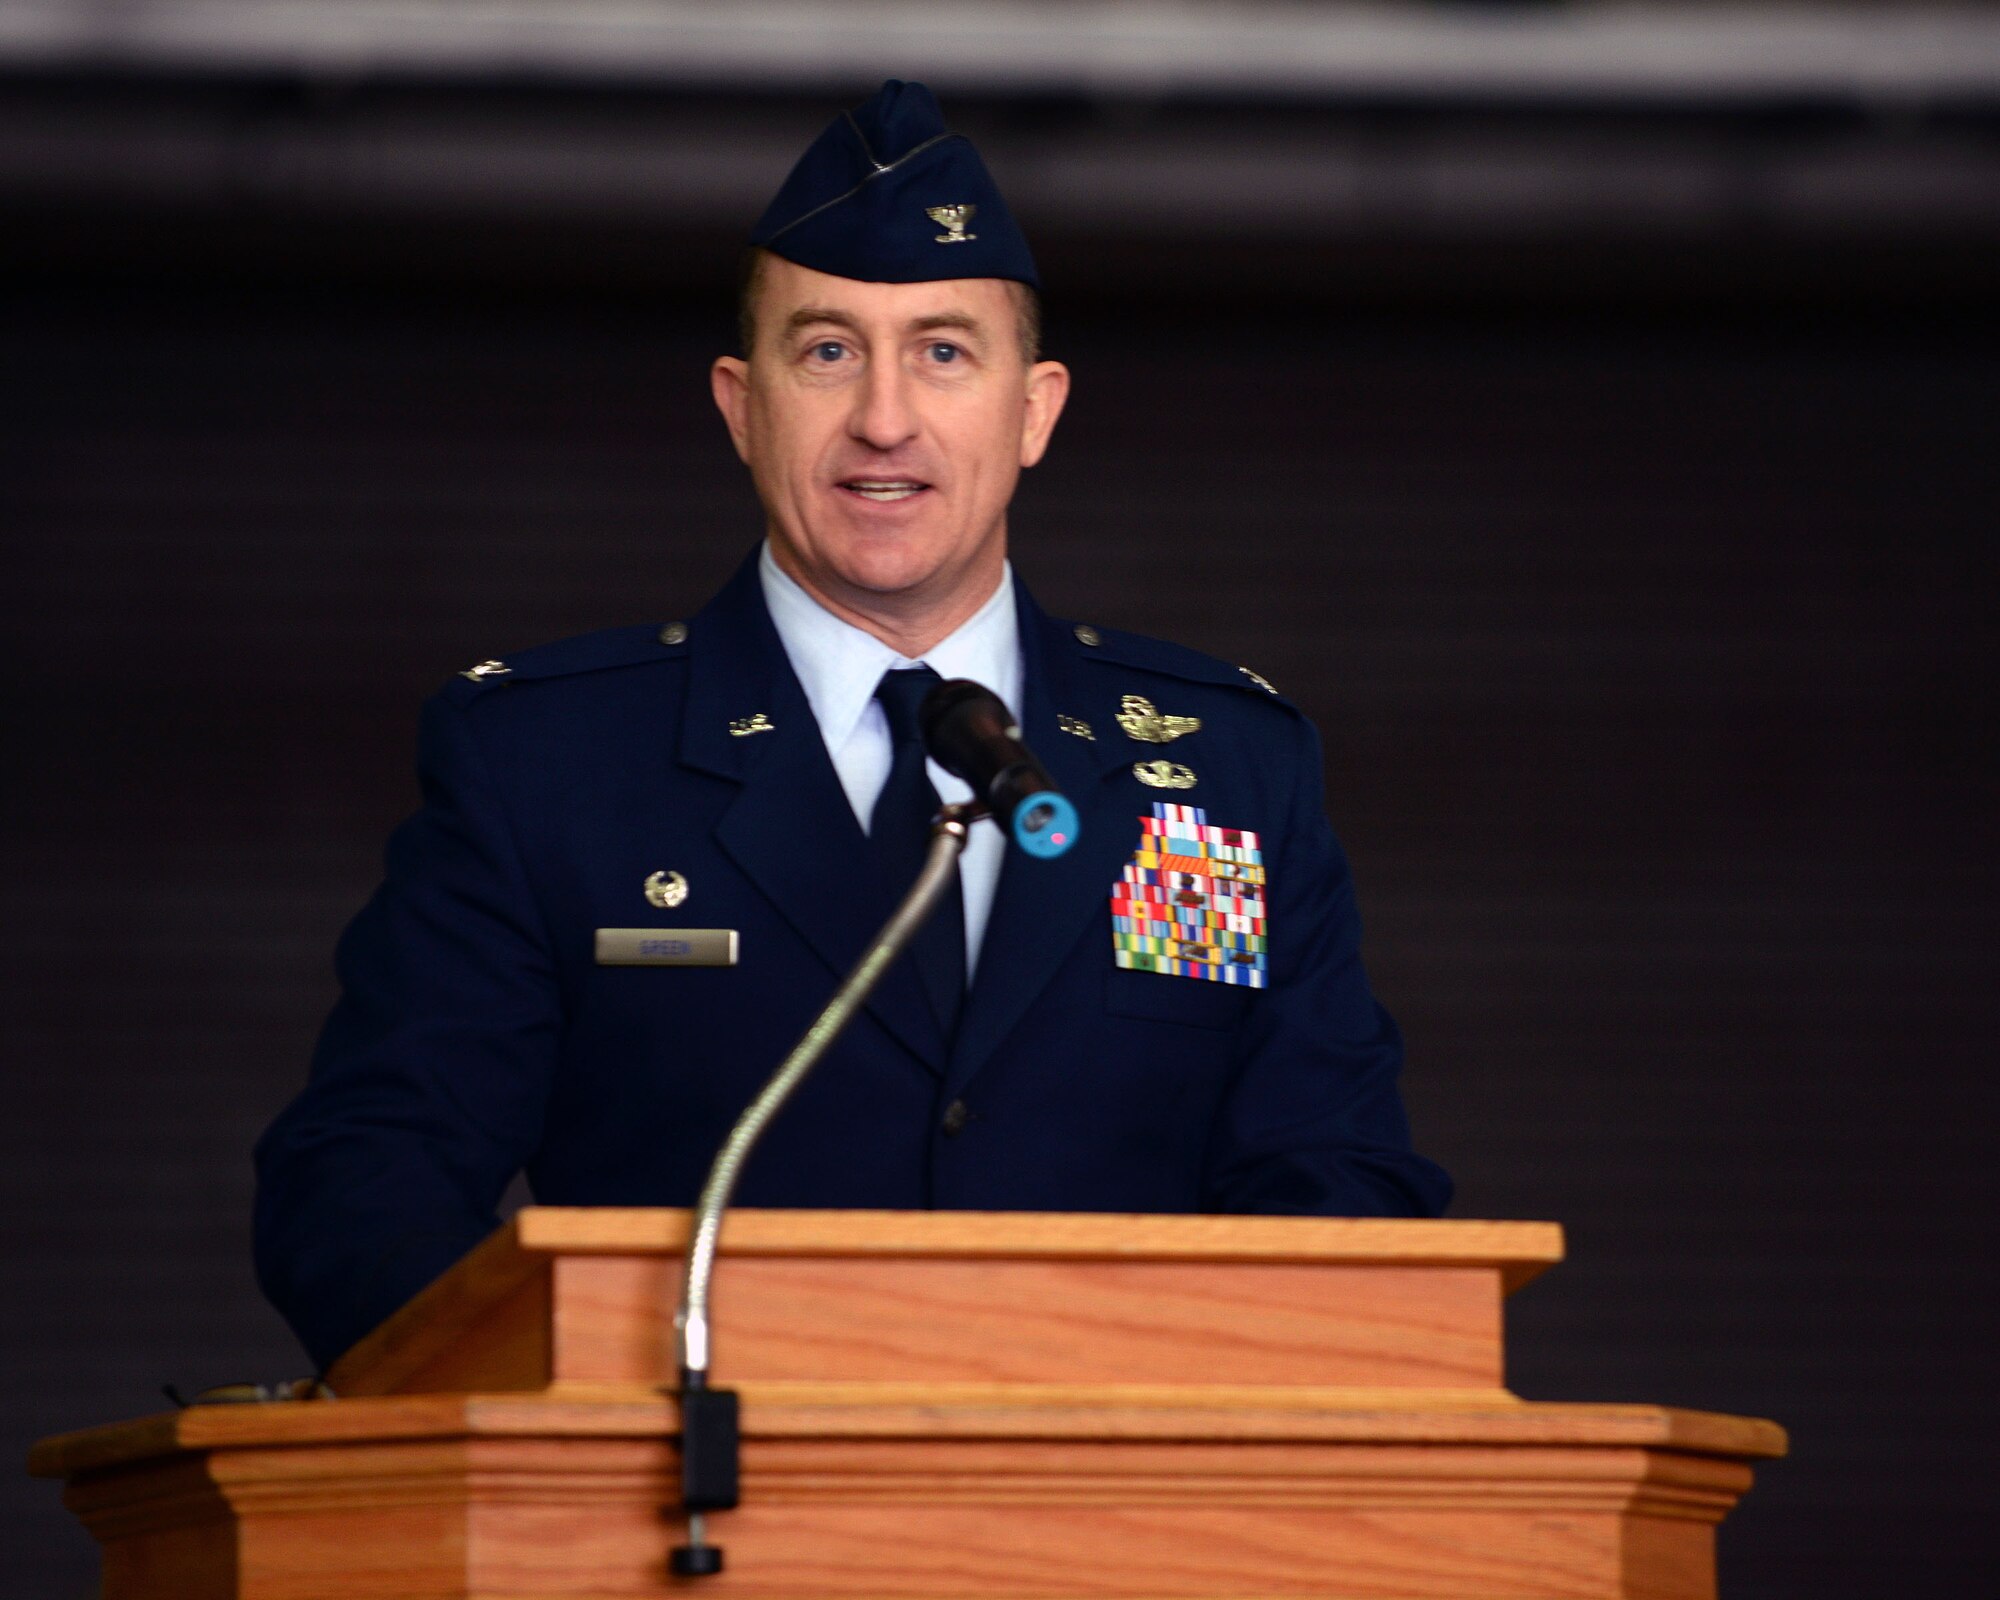 U.S. Air Force Col. Nathan Green, 752nd Special Operations Group commander, speaks during the 352nd Special Operations Wing activation ceremony March 23, 2015, on RAF Mildenhall, England. (U.S. Air Force photo by Senior Airman Christine Griffiths)